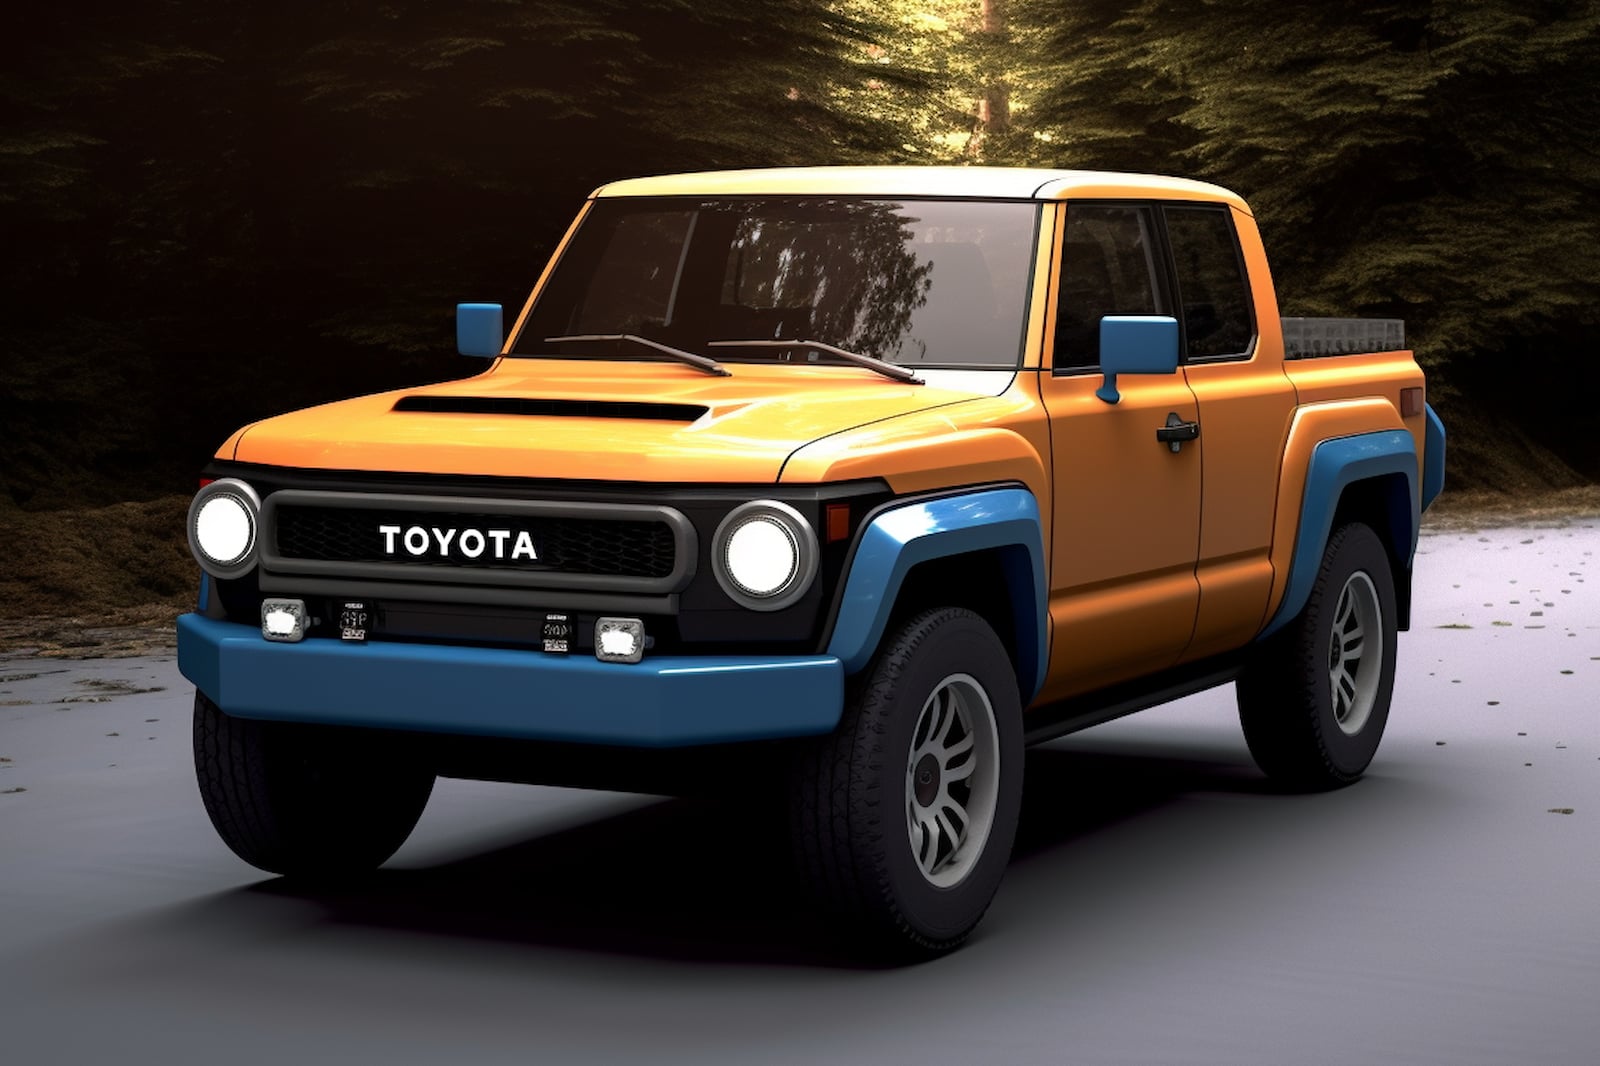 THIS is a Toyota? Could Latest Model Make its Way to United States Next?